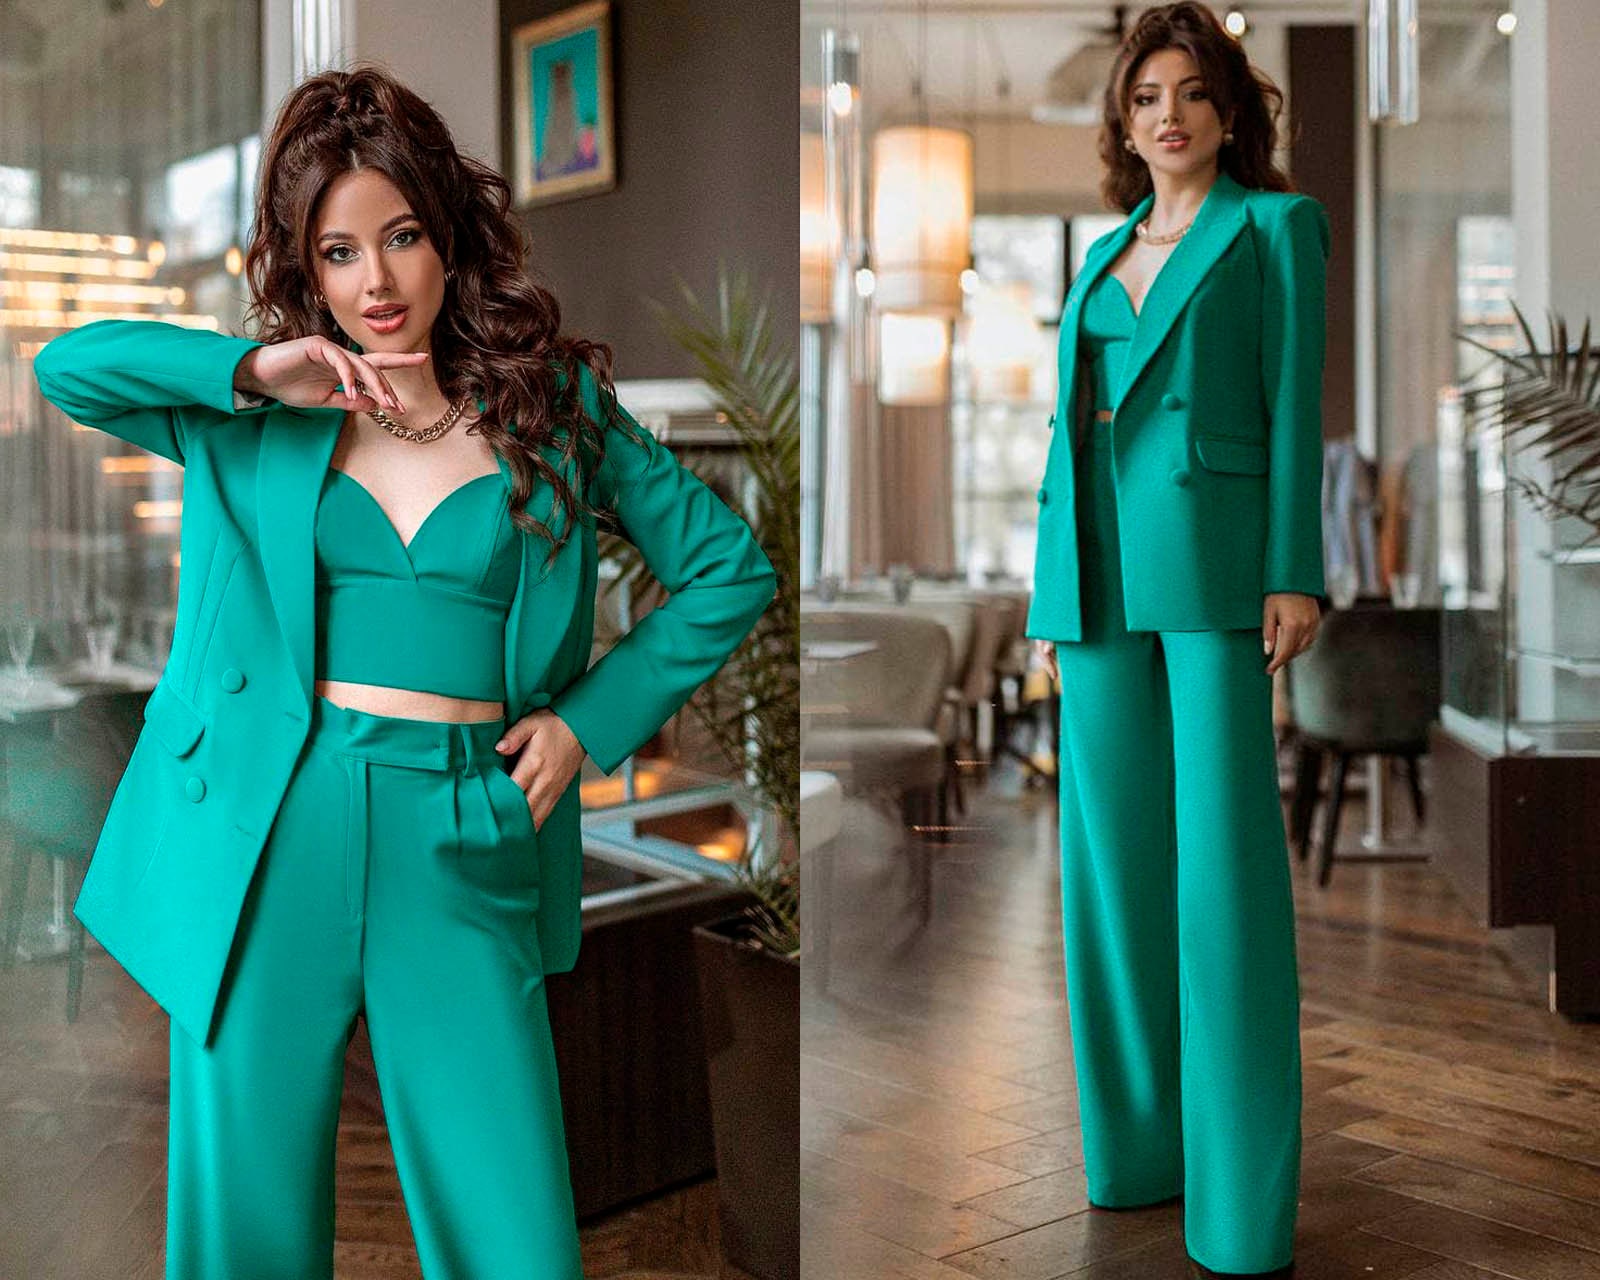 Suits For Women, Ladies Suits, Damsel in a Dress